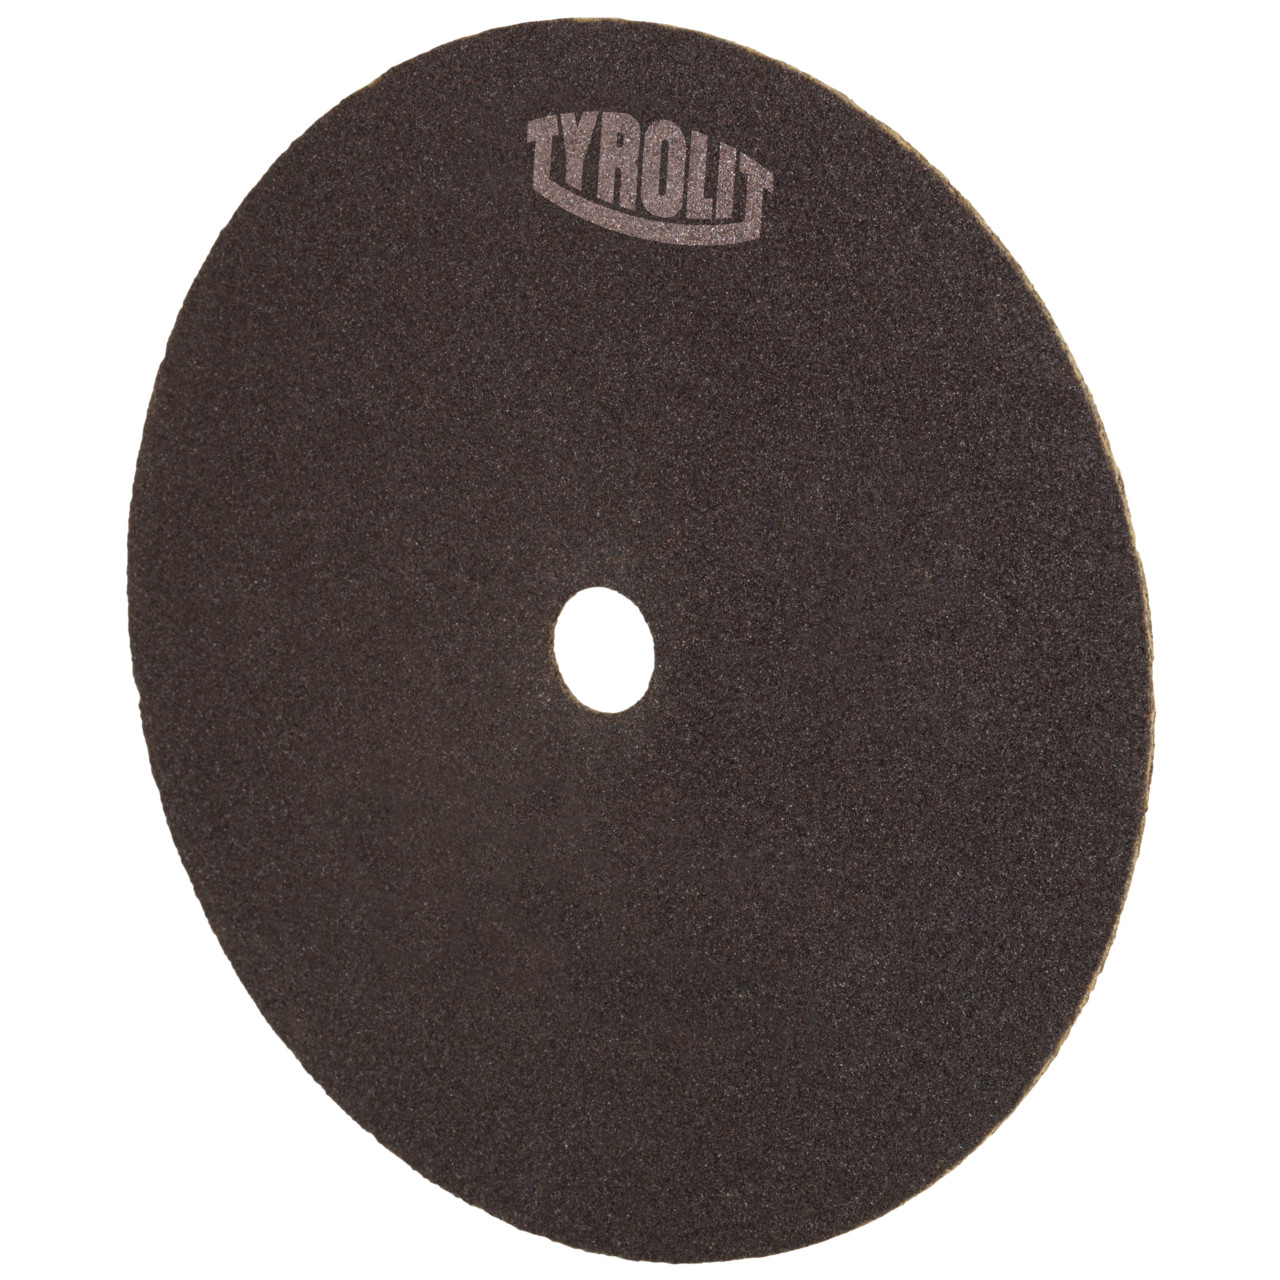 TYROLIT cut-off wheel for cutting and saw sharpening DxDxH 250x1.5x25.4 For steel and HSS, shape: 41N - straight version (non-woven cut-off wheel), Art. 373520